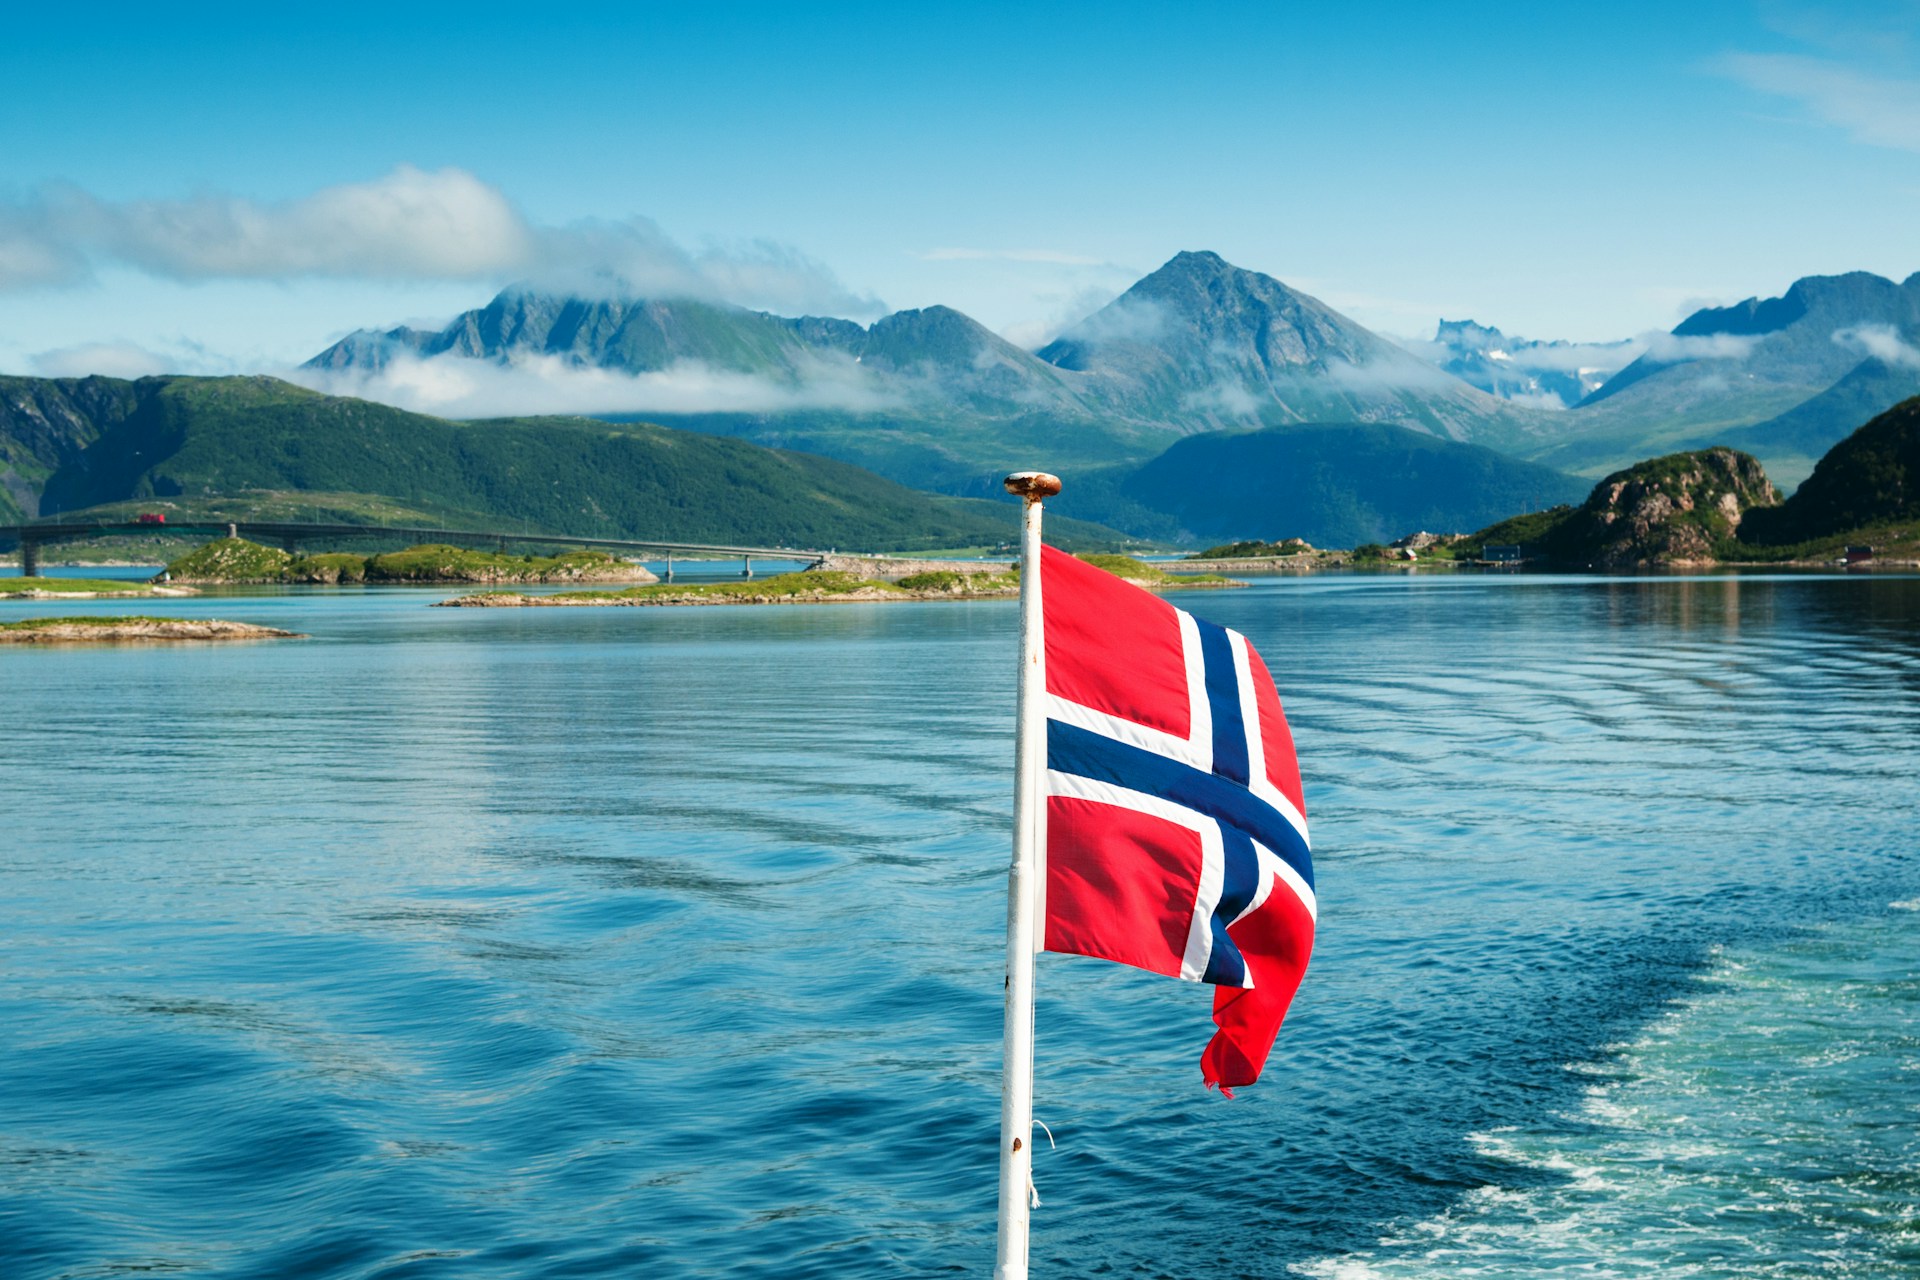 Photo taken from the back of a boat showing the Norwegian flag and a great landscape